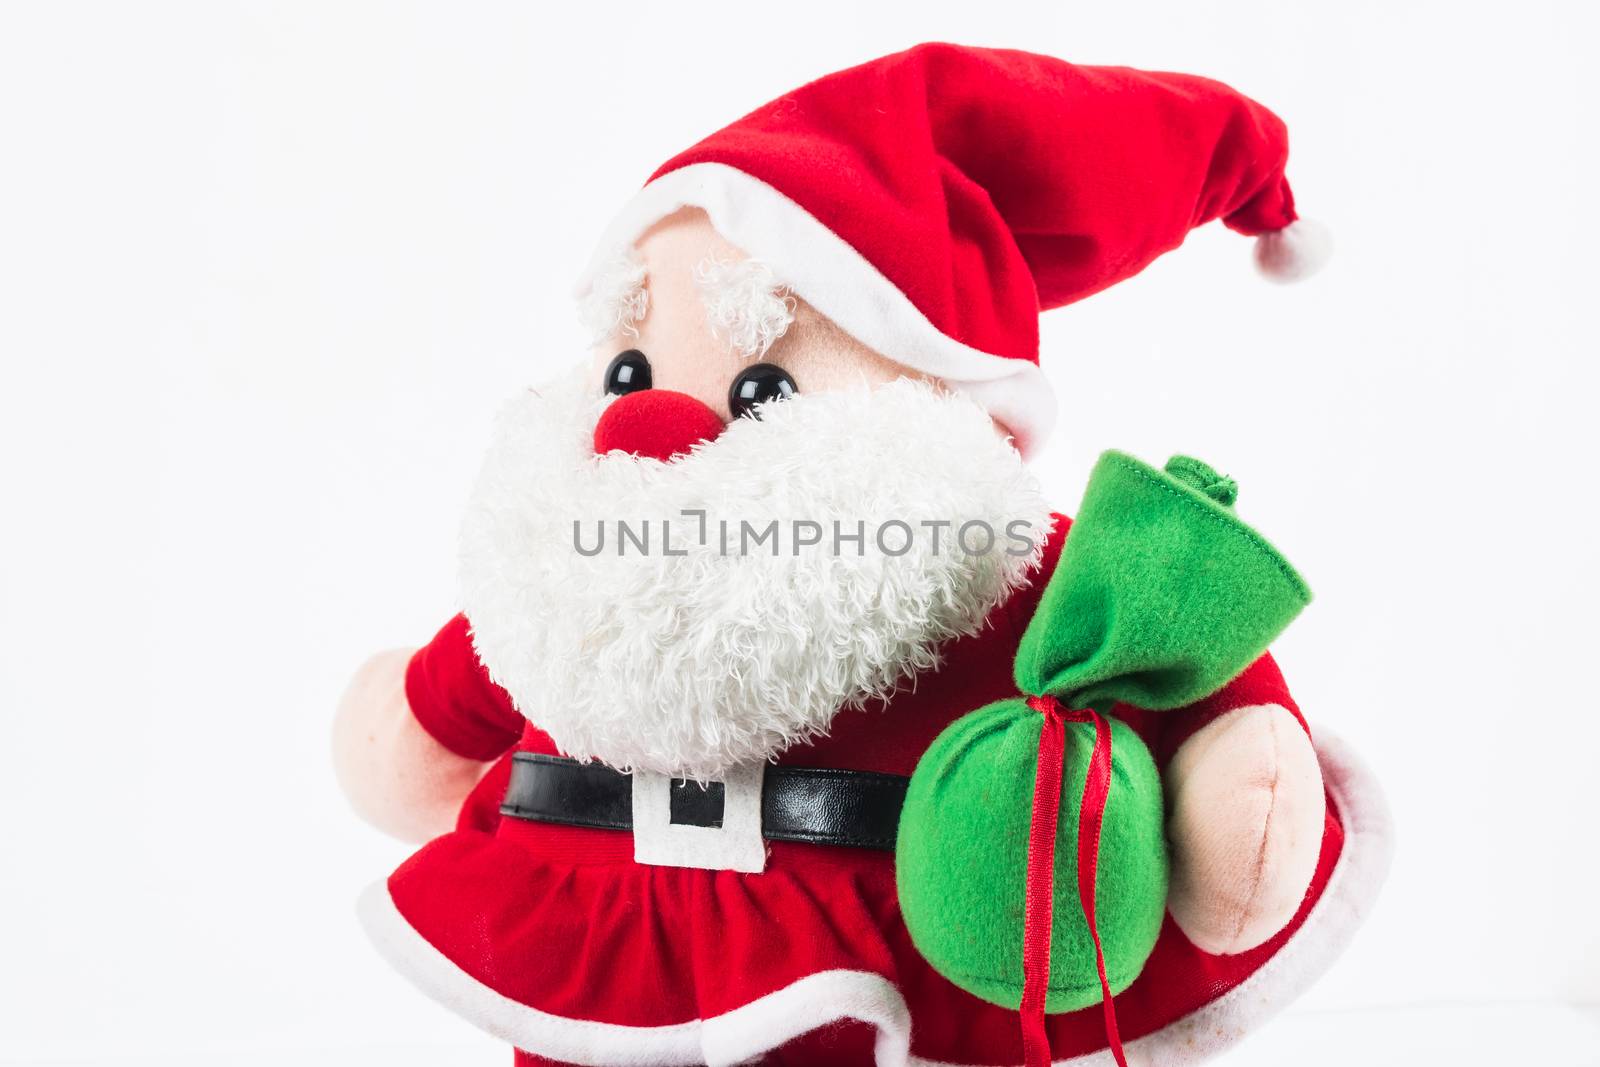 Santa Claus doll with green sack on white background